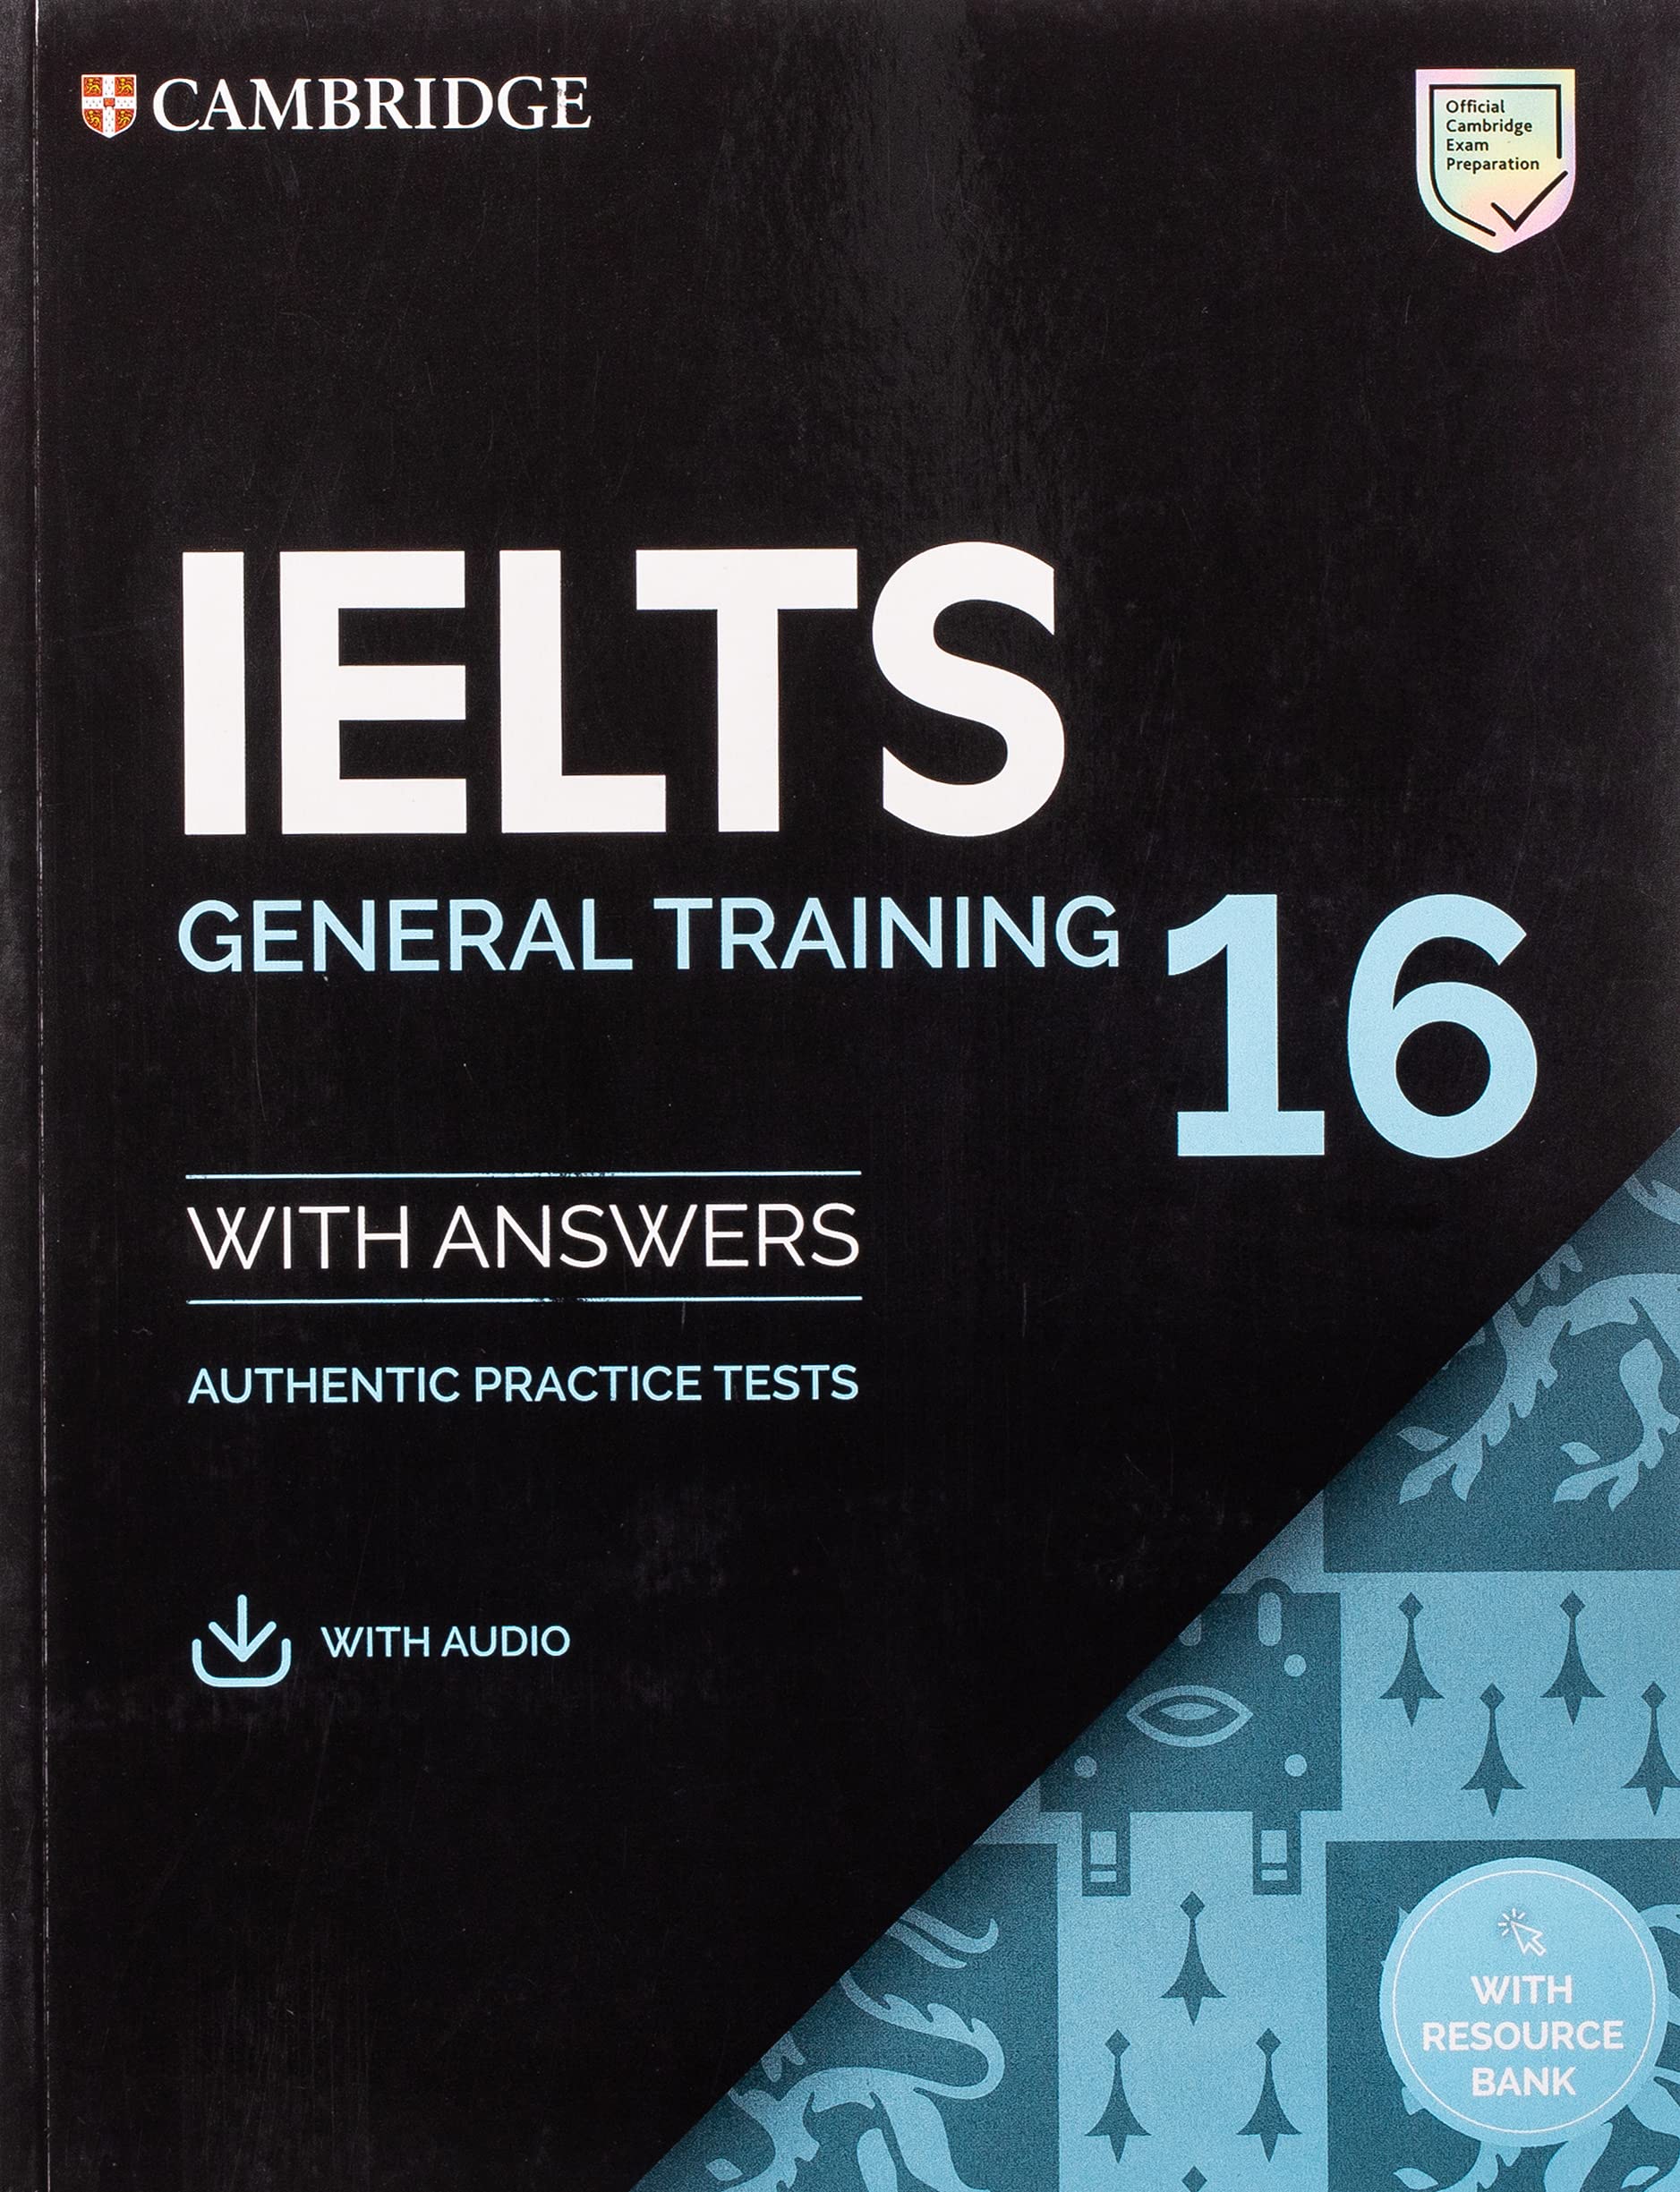 Ielts 16 General Training Student's Book With Answers With Audio With Resource Bank: Authentic Practice Tests With Answers (ielts Practice Tests)